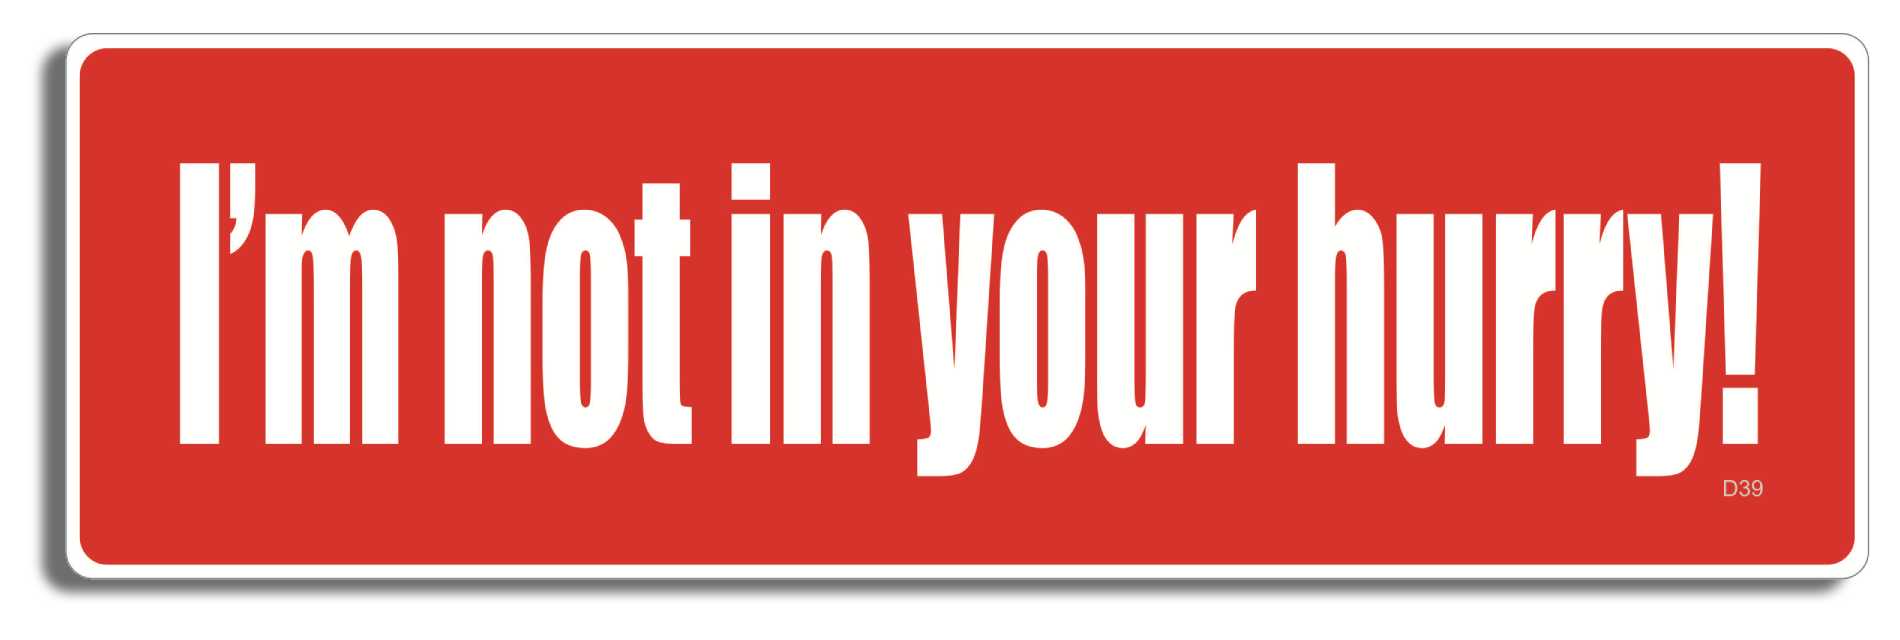 I'm not in your hurry! -  3" x 10" Bumper Sticker--Car Magnet- -  Decal Bumper Sticker-funny Bumper Sticker Car Magnet I'm not in your hurry!-   Decal for carsdrive safely, safe driving, tailgaters, tailgating